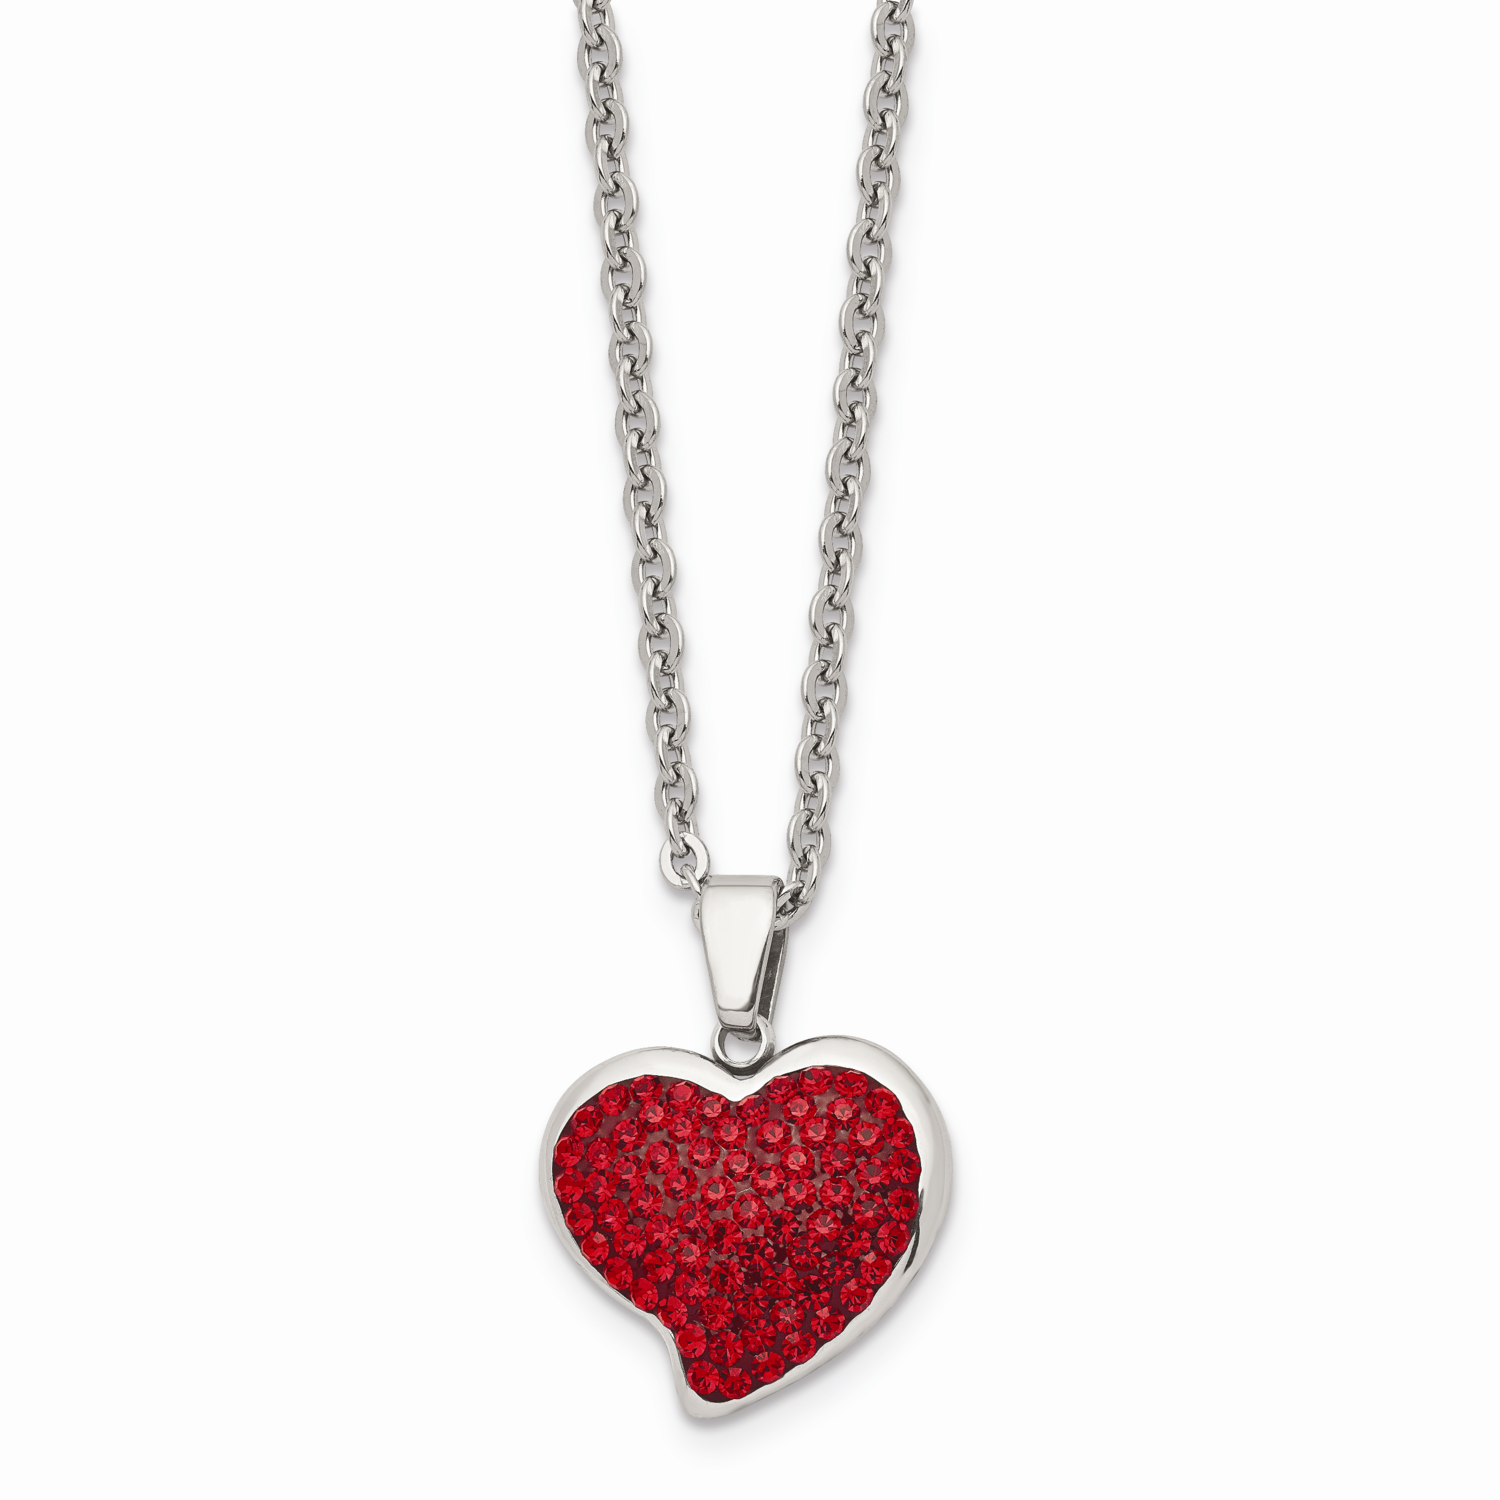 Red Crystal Heart Pendant Necklace Stainless Steel SRN602-22